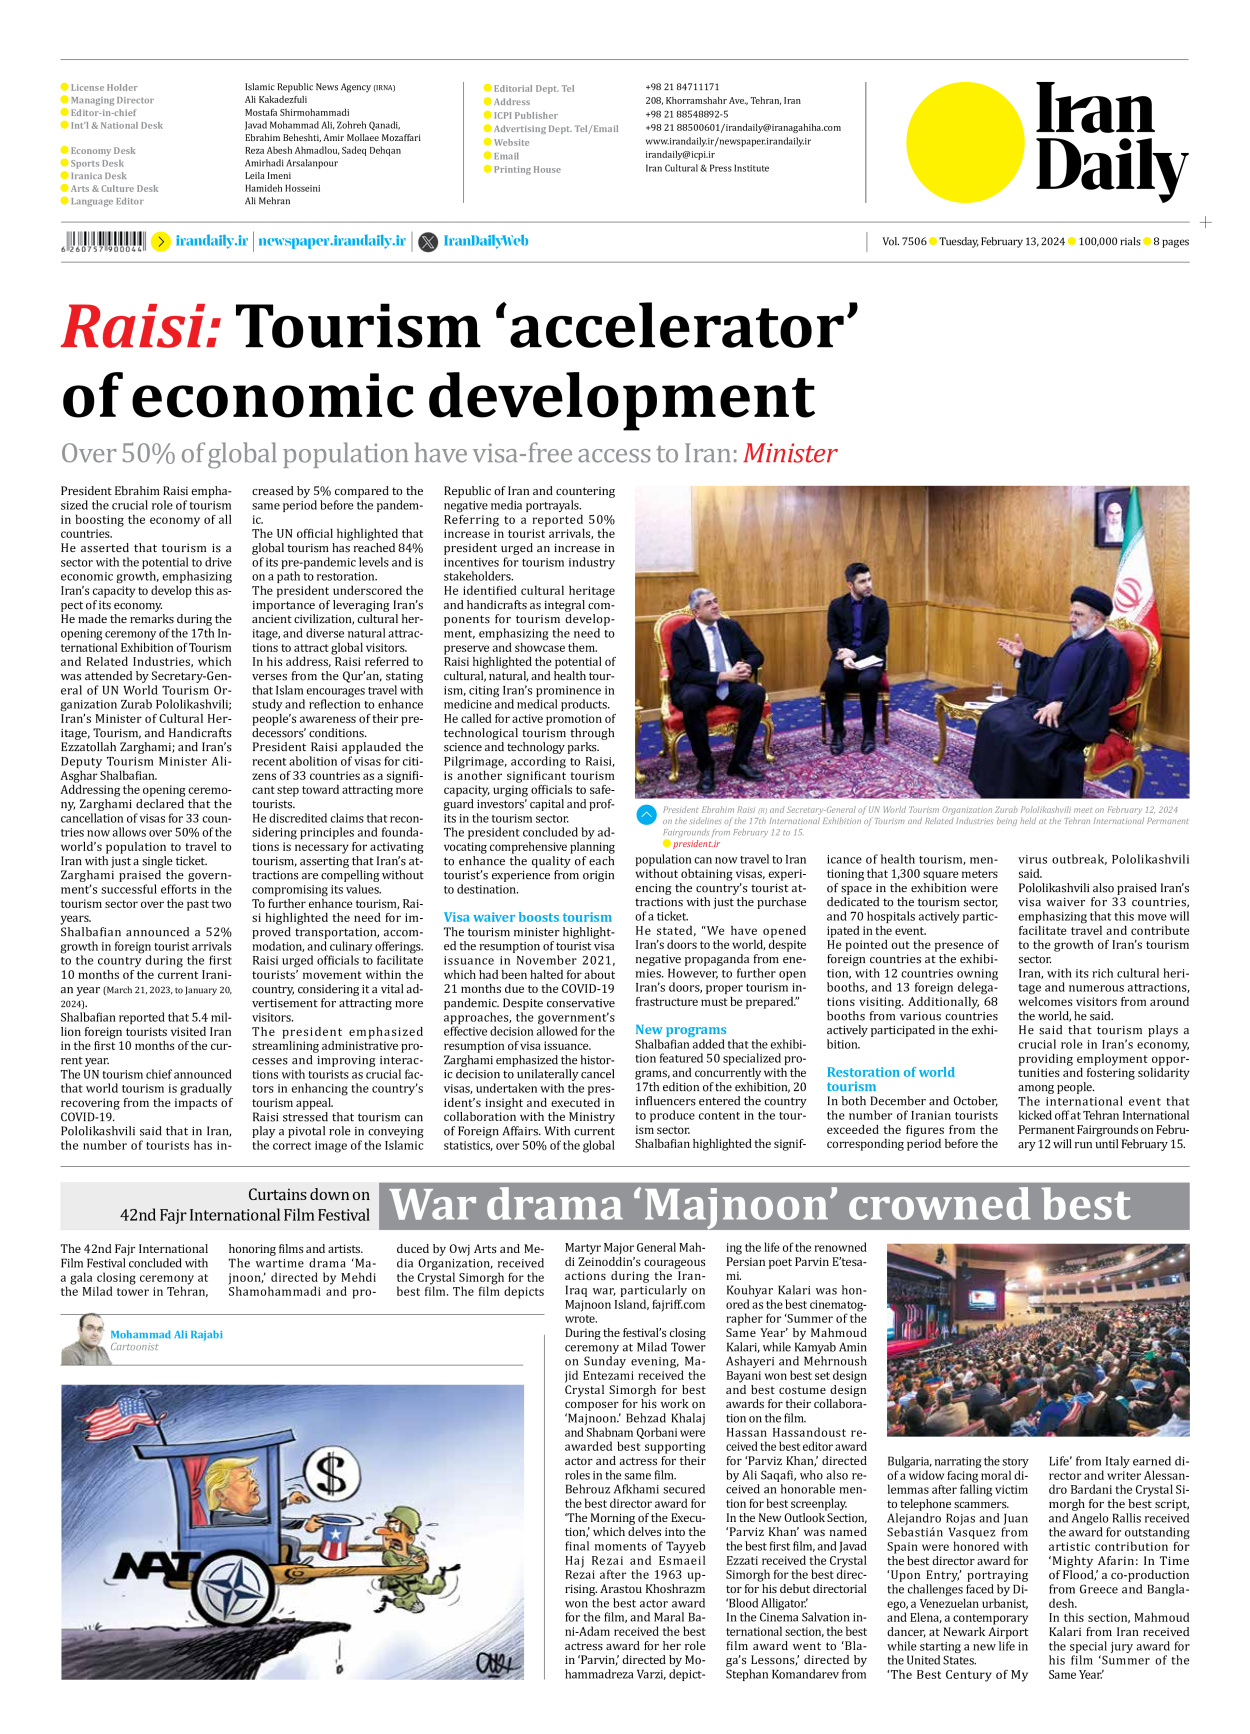 Iran Daily - Number Seven Thousand Five Hundred and Six - 13 February 2024 - Page 8